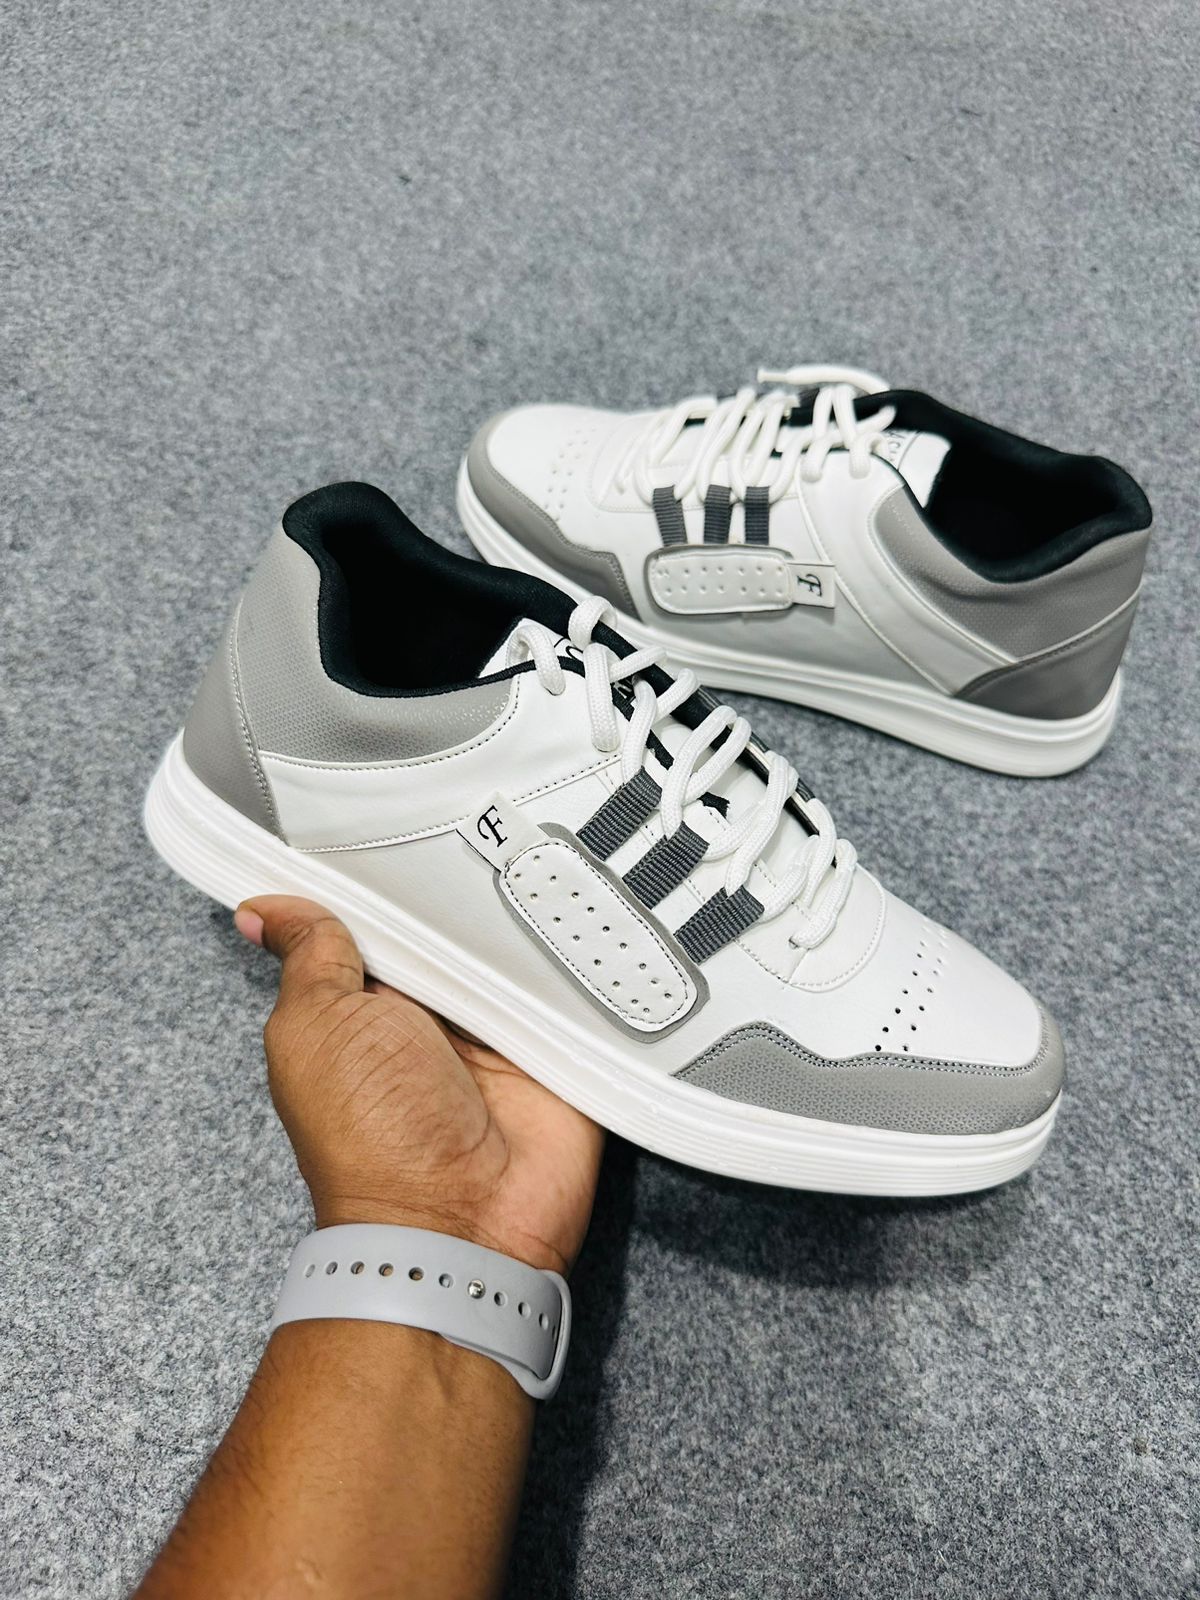 Exclusive skateboard shoes Collection 2023 Better Choice Stylish And Fashionable Sneakers For Man